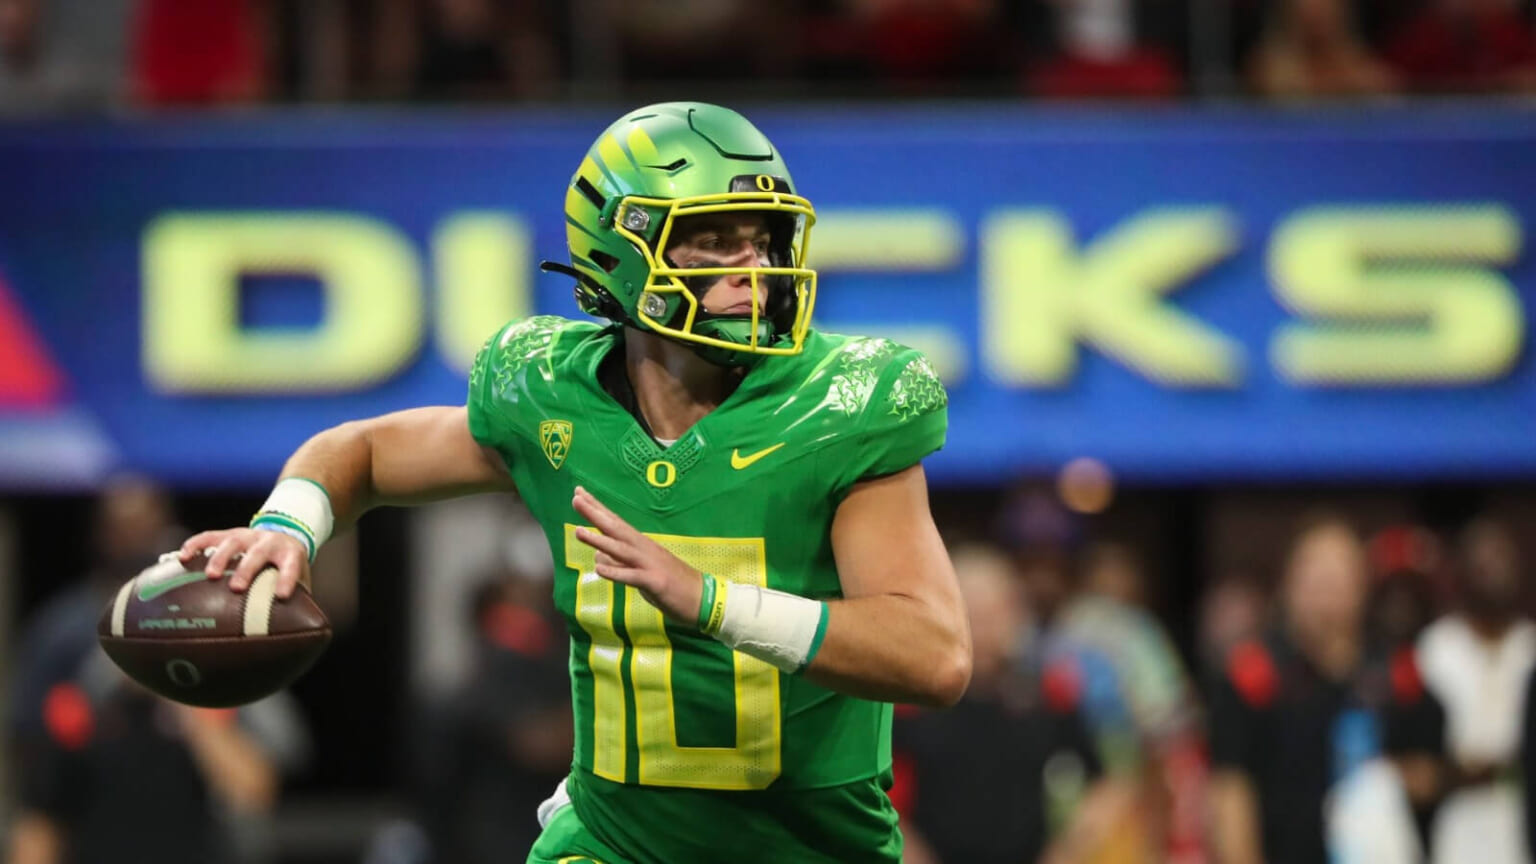 How To Watch the Oregon Ducks vs the Oregon State Beavers